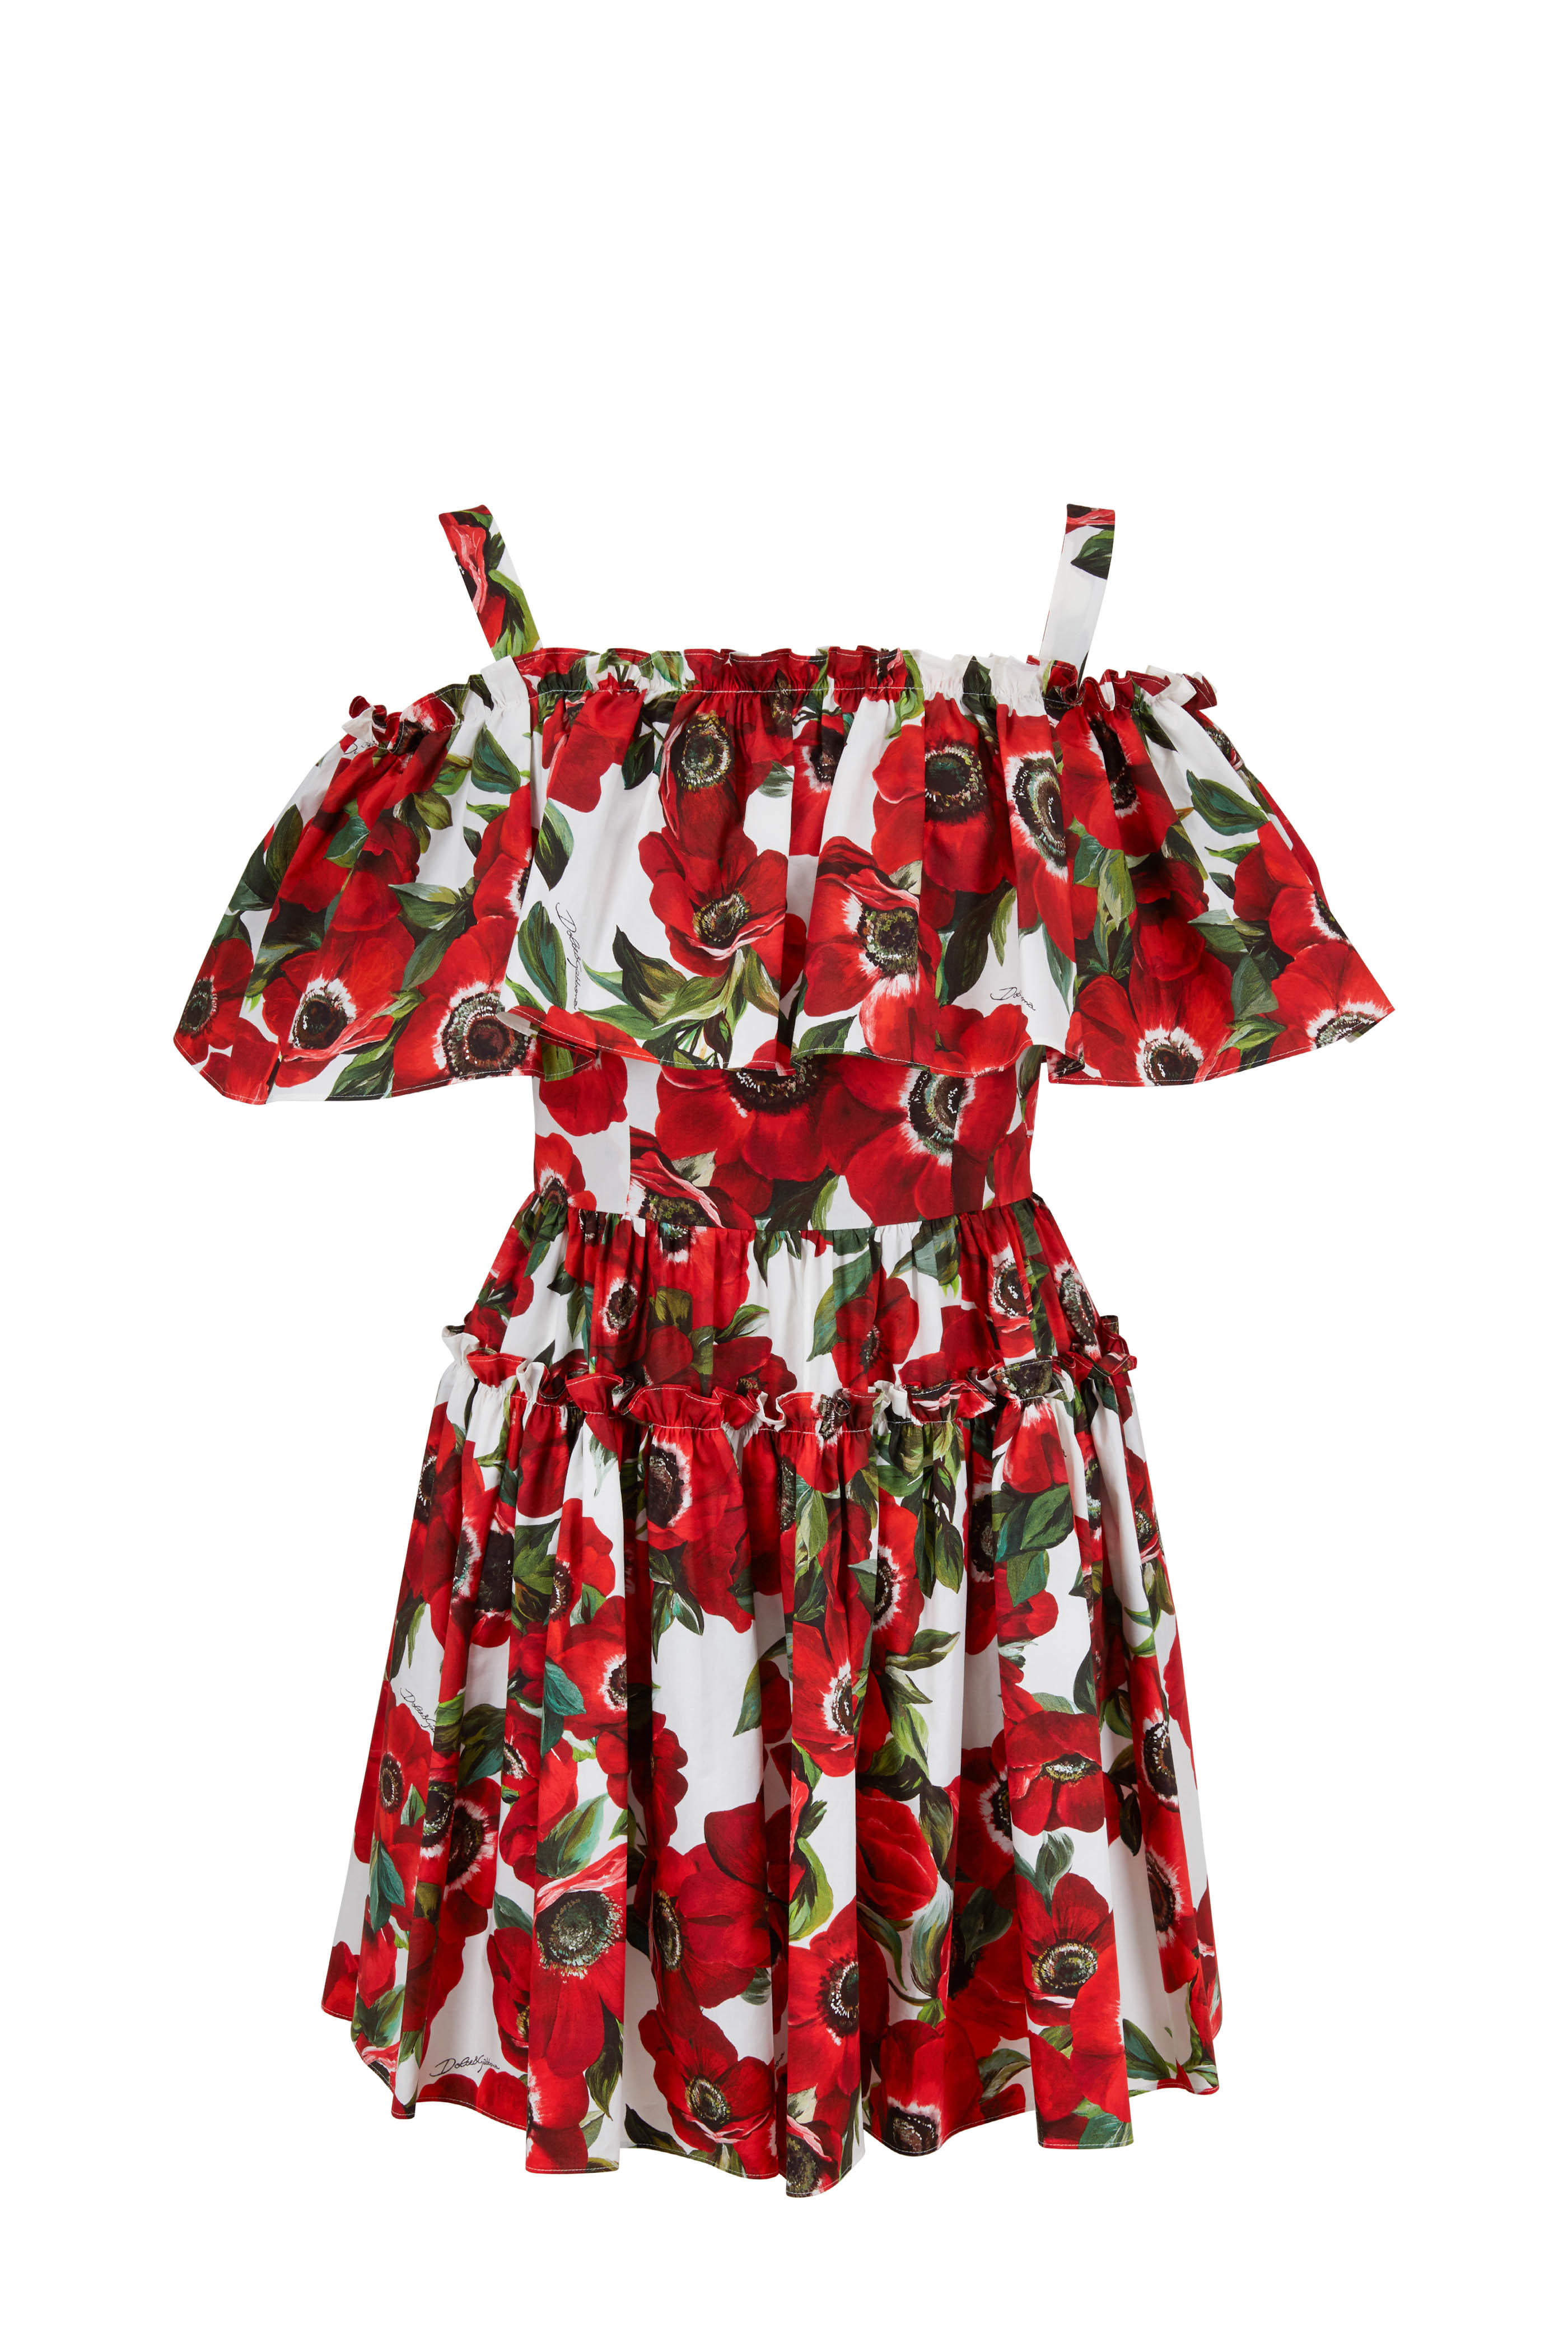 dolce and gabbana red floral dress